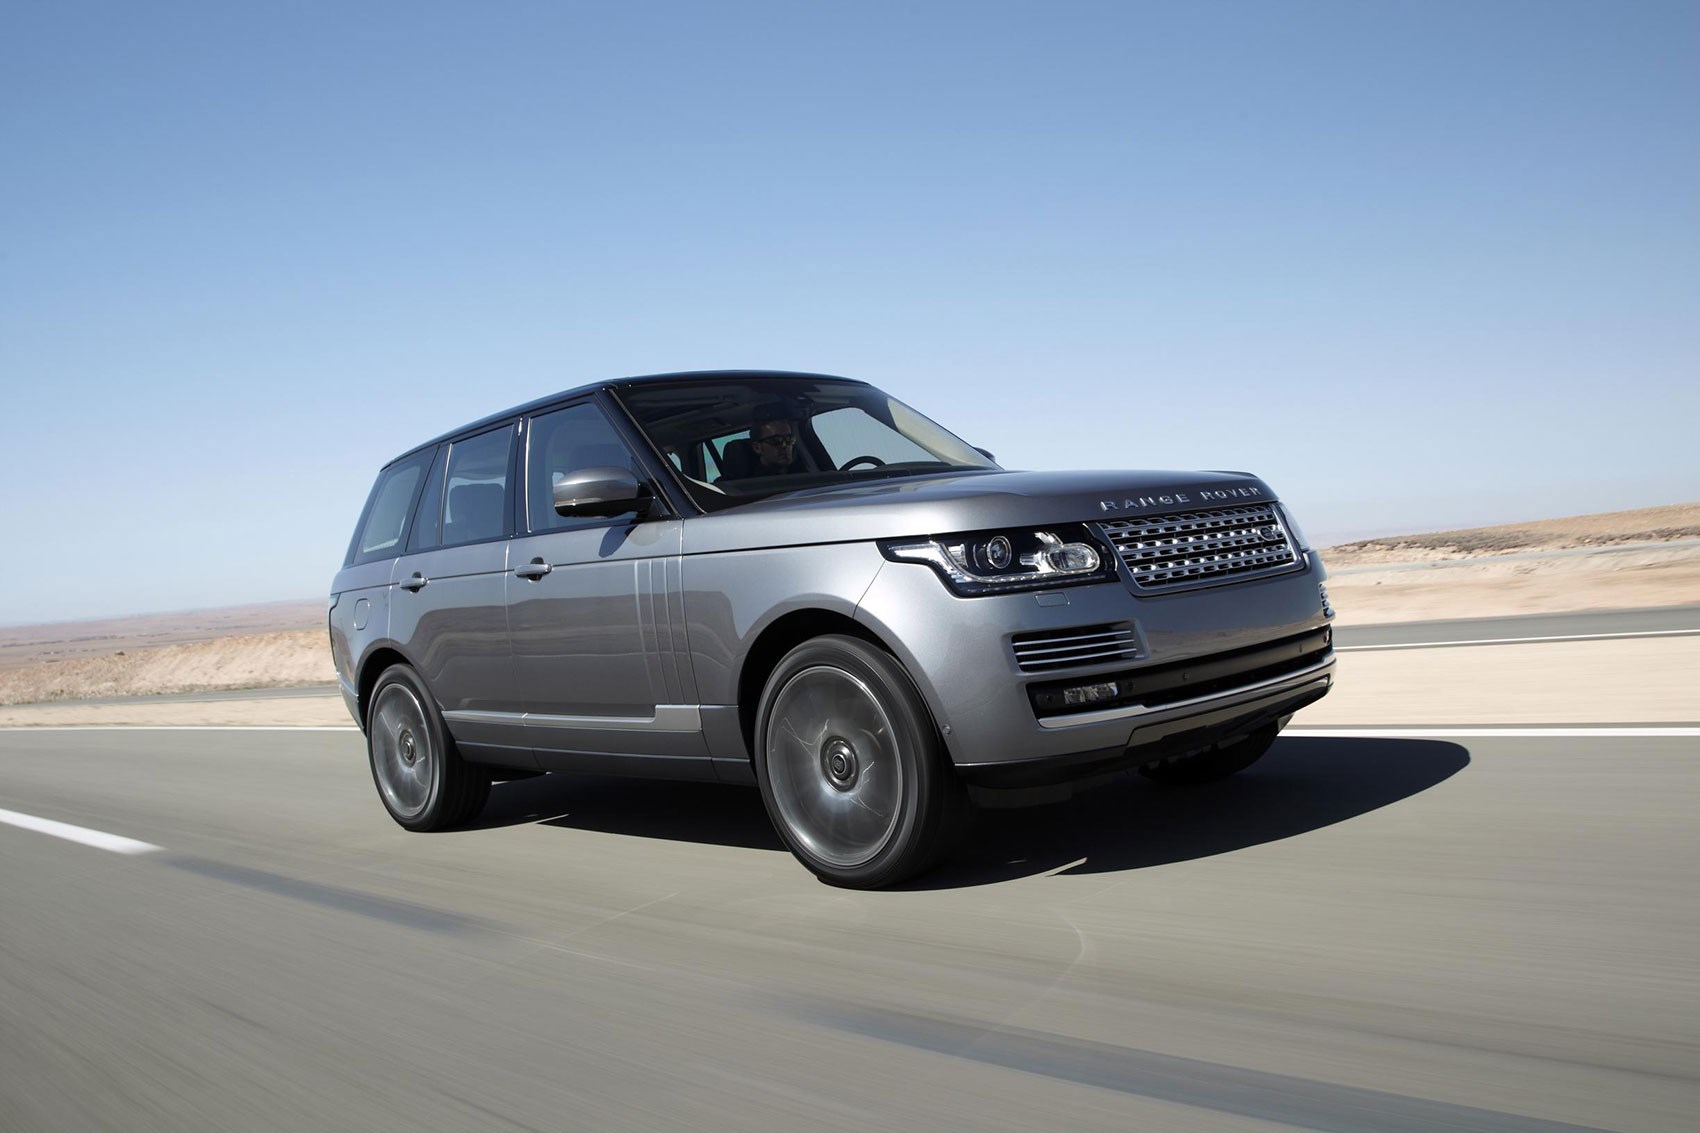 Range Rover Autobiography review: There's still nothing quite like it